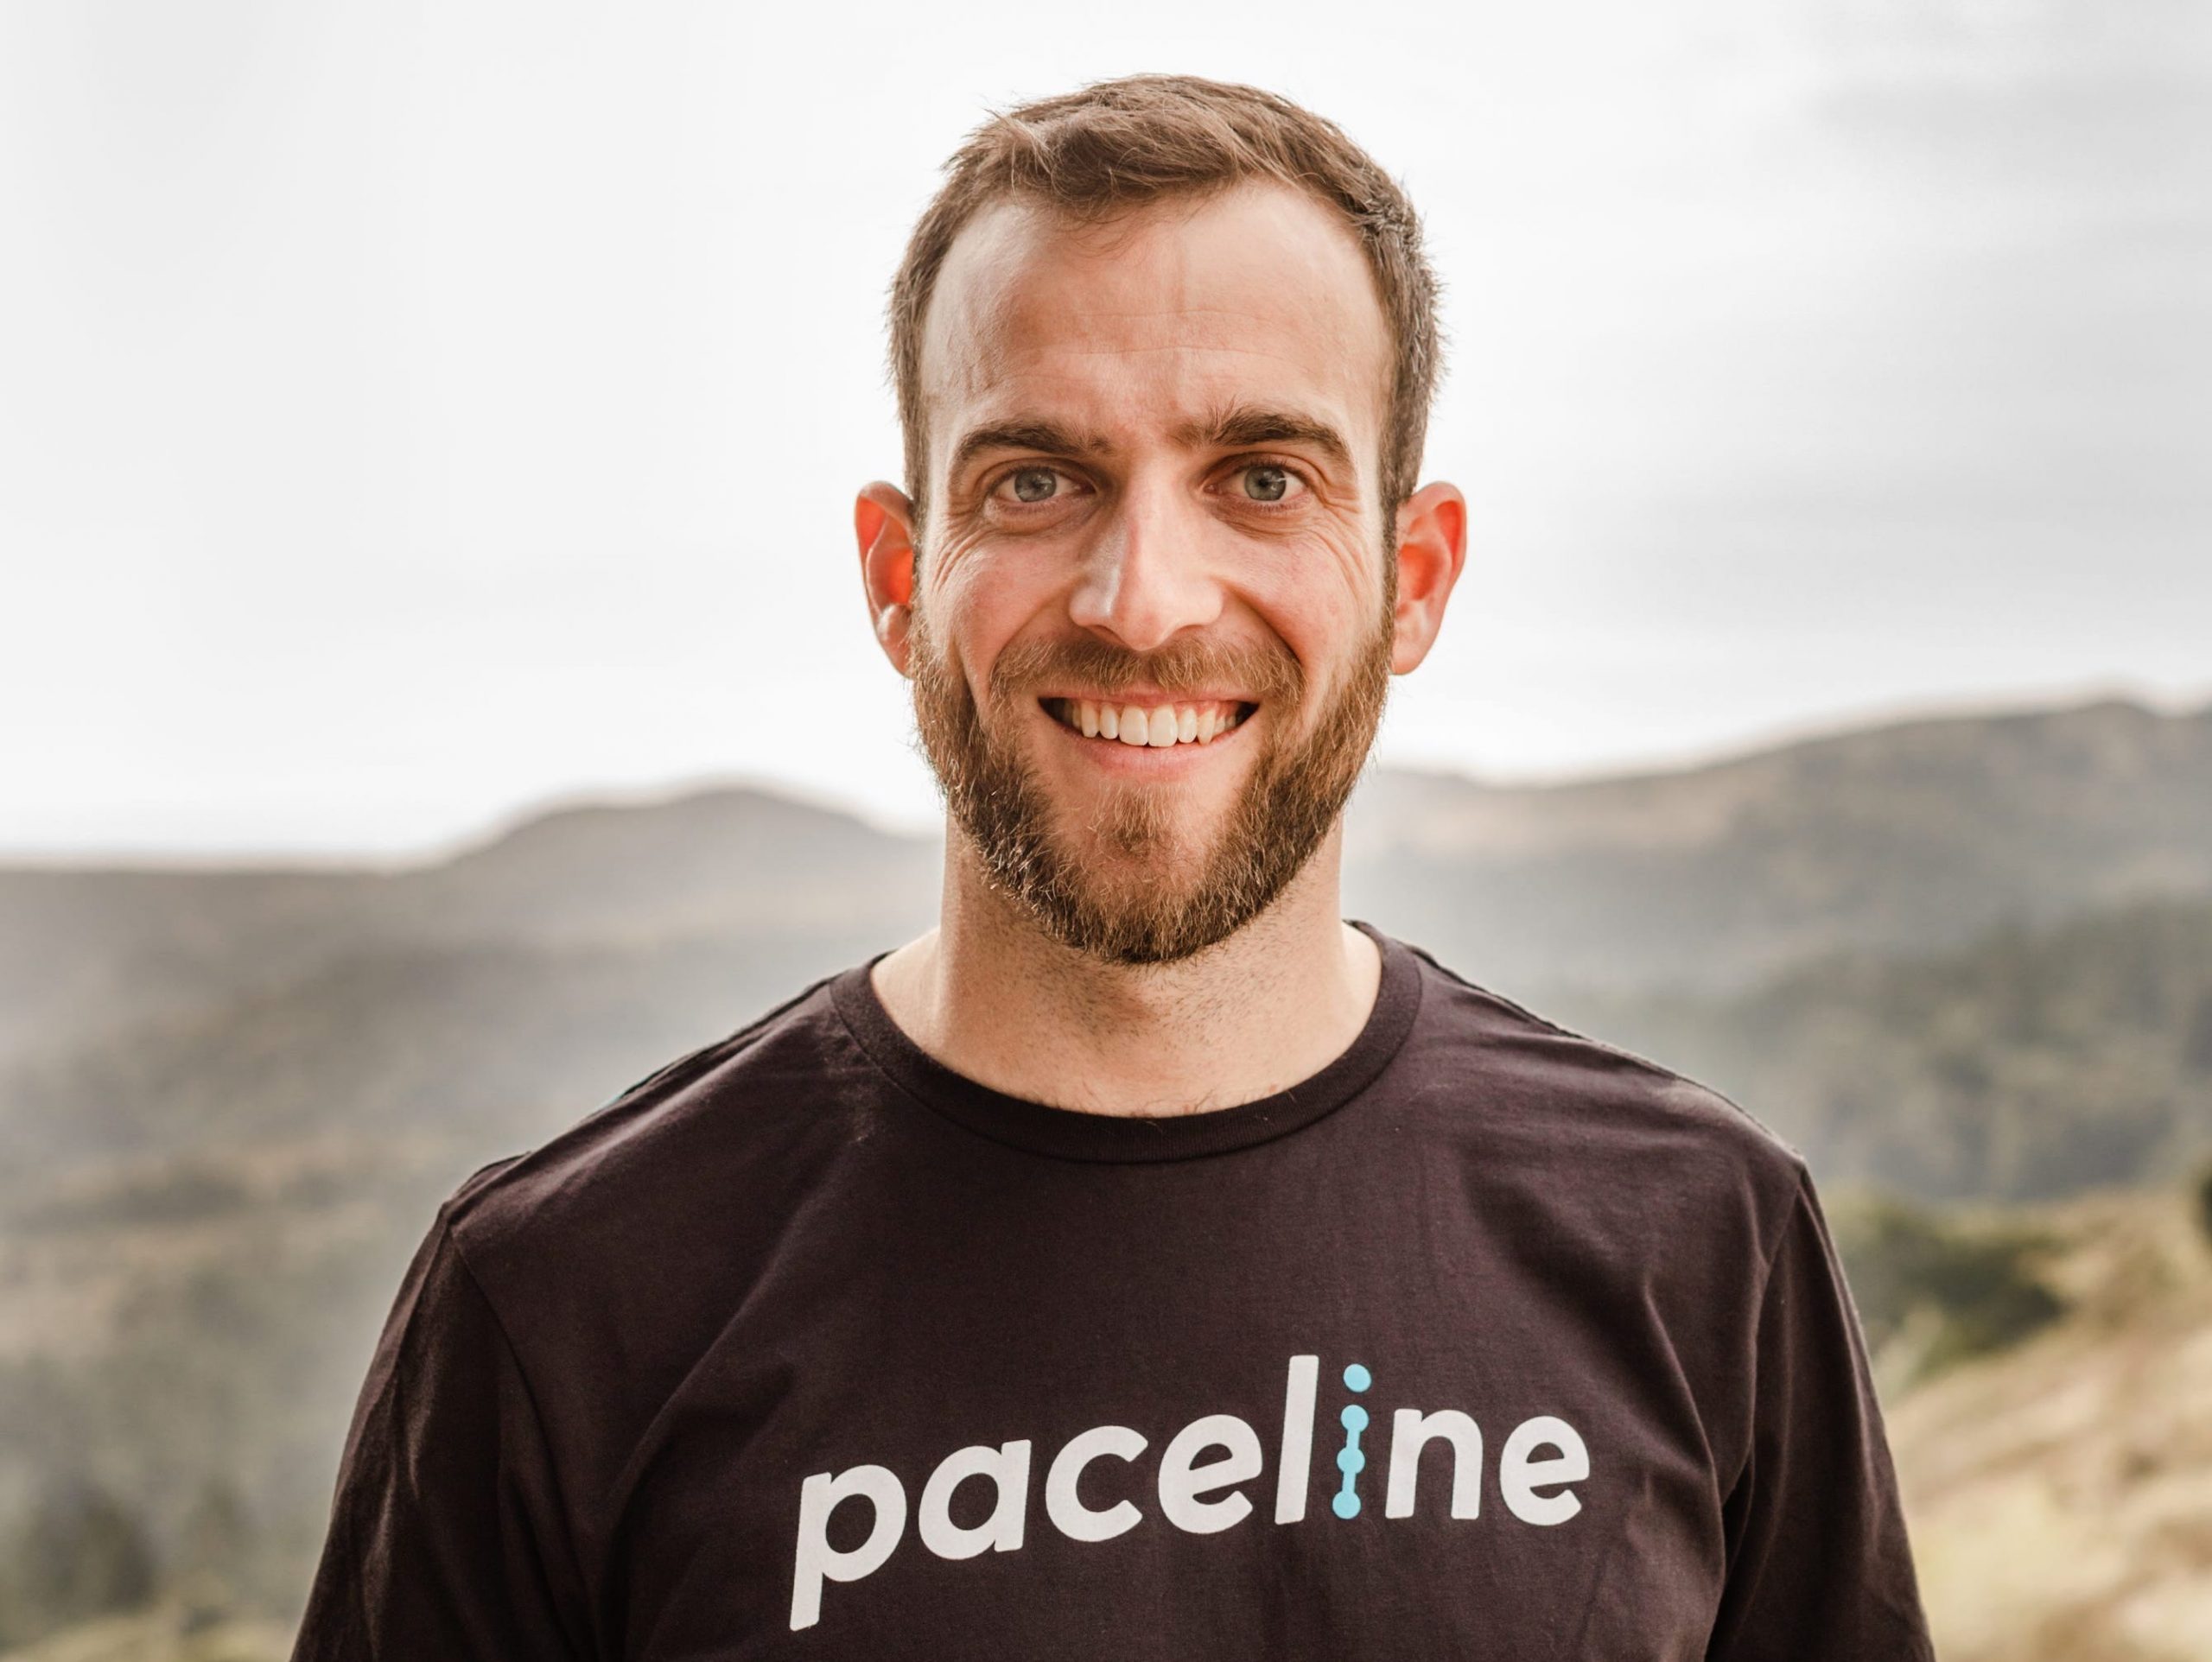 Joel Lieginger, CEO and founder of Paceline